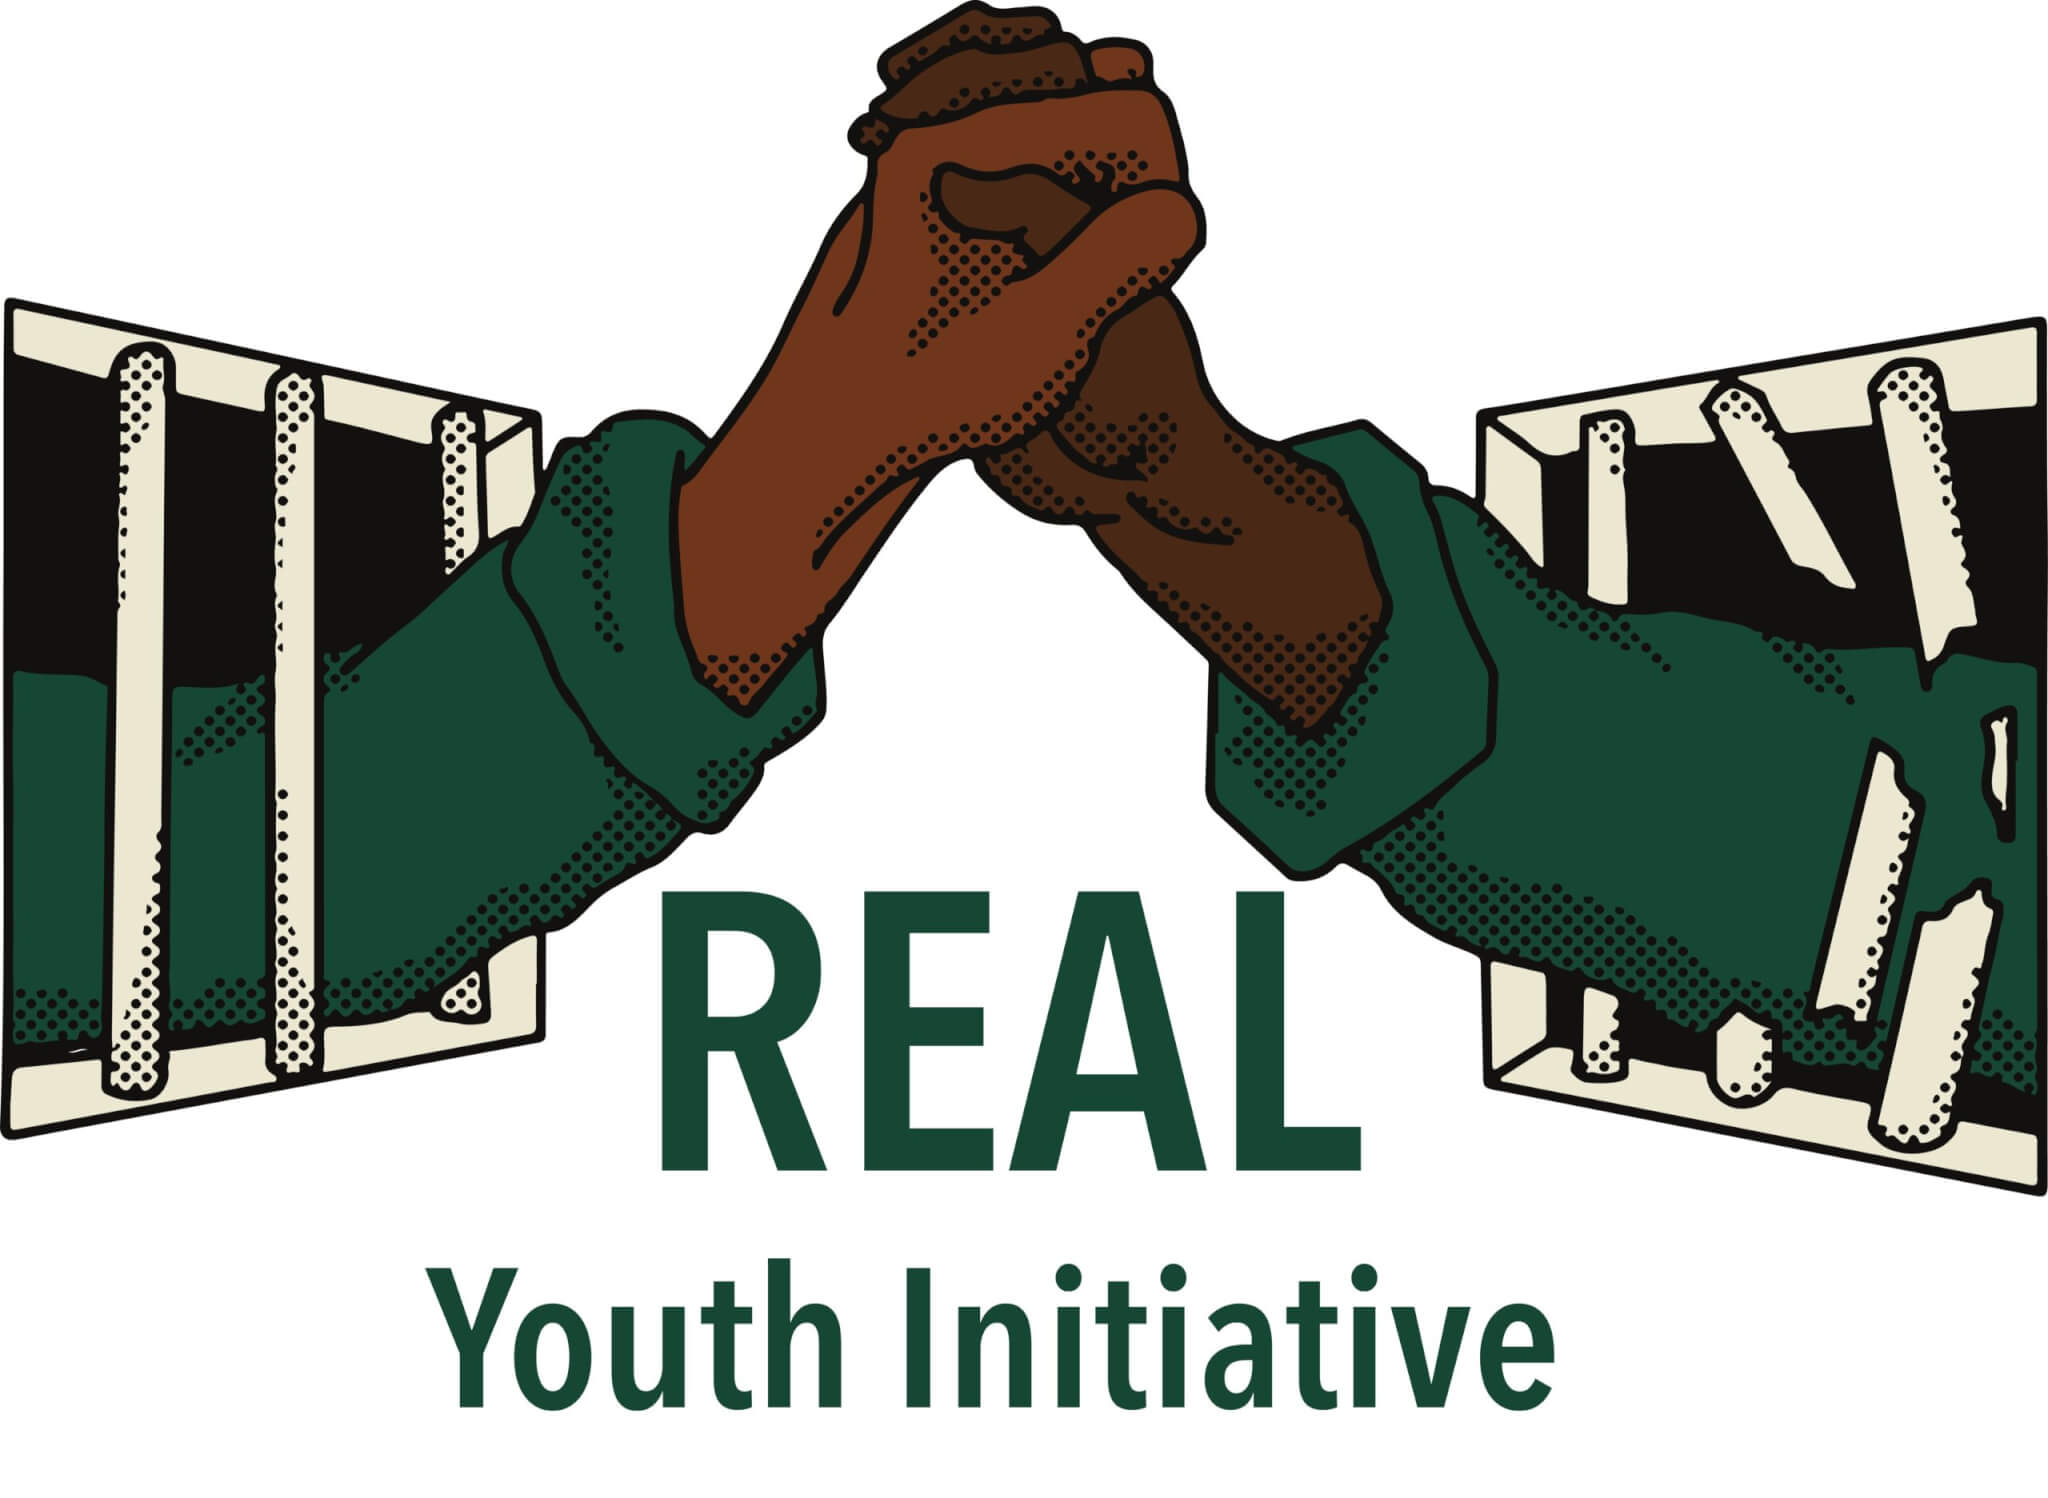 REAL Youth Initiative